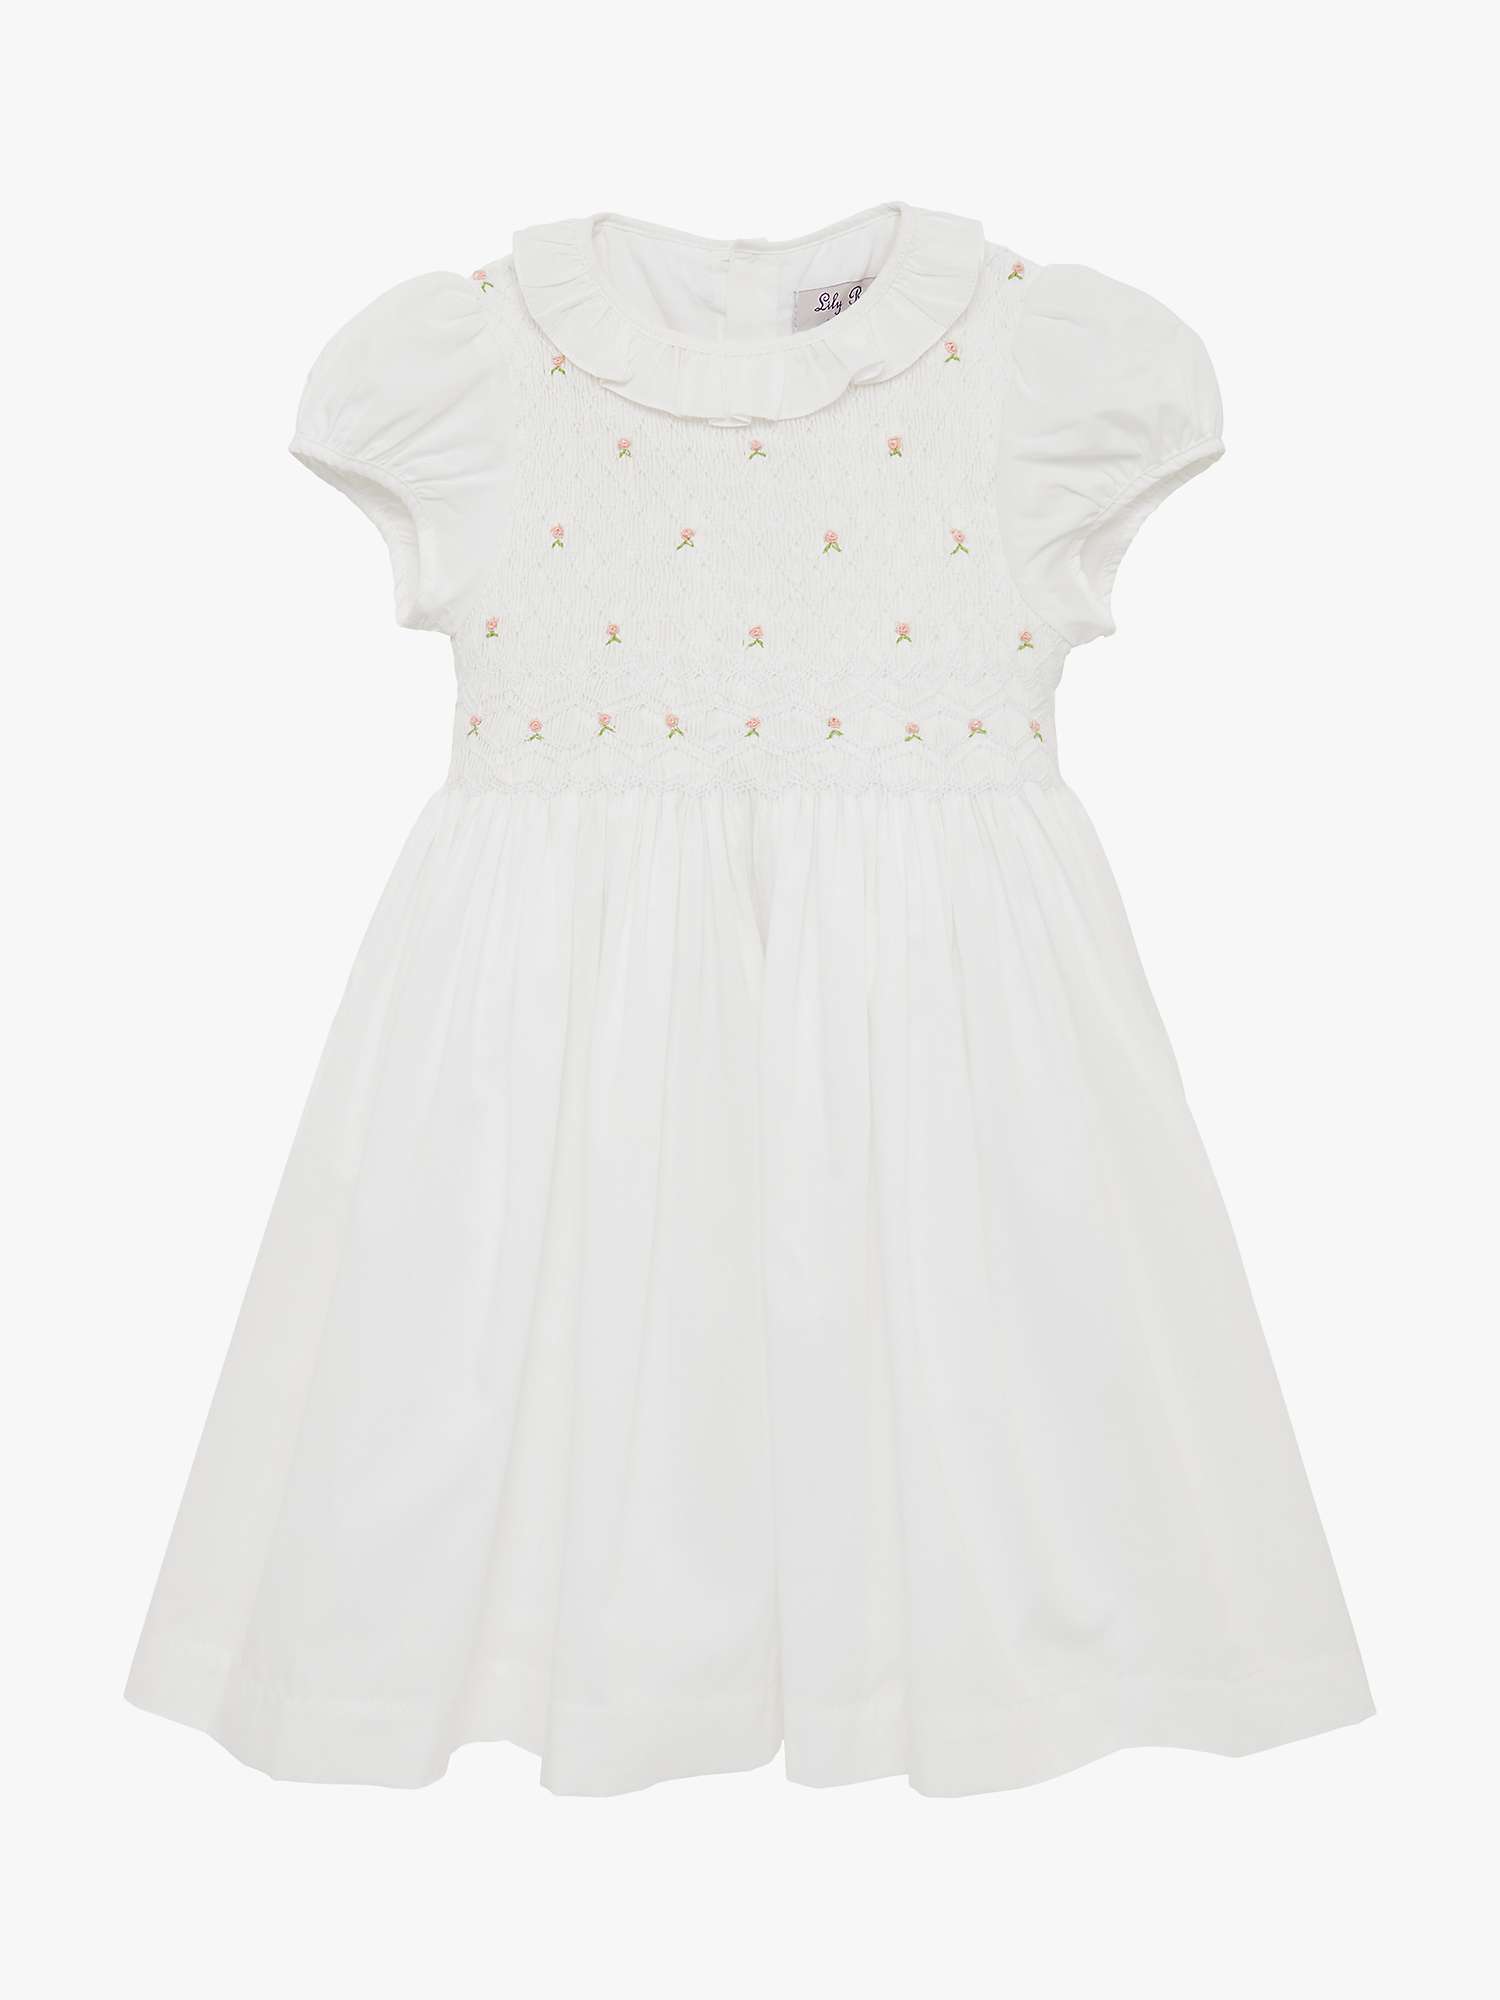 Buy Trotters Willow Baby Hand Smocked Bodice Dress, White Online at johnlewis.com